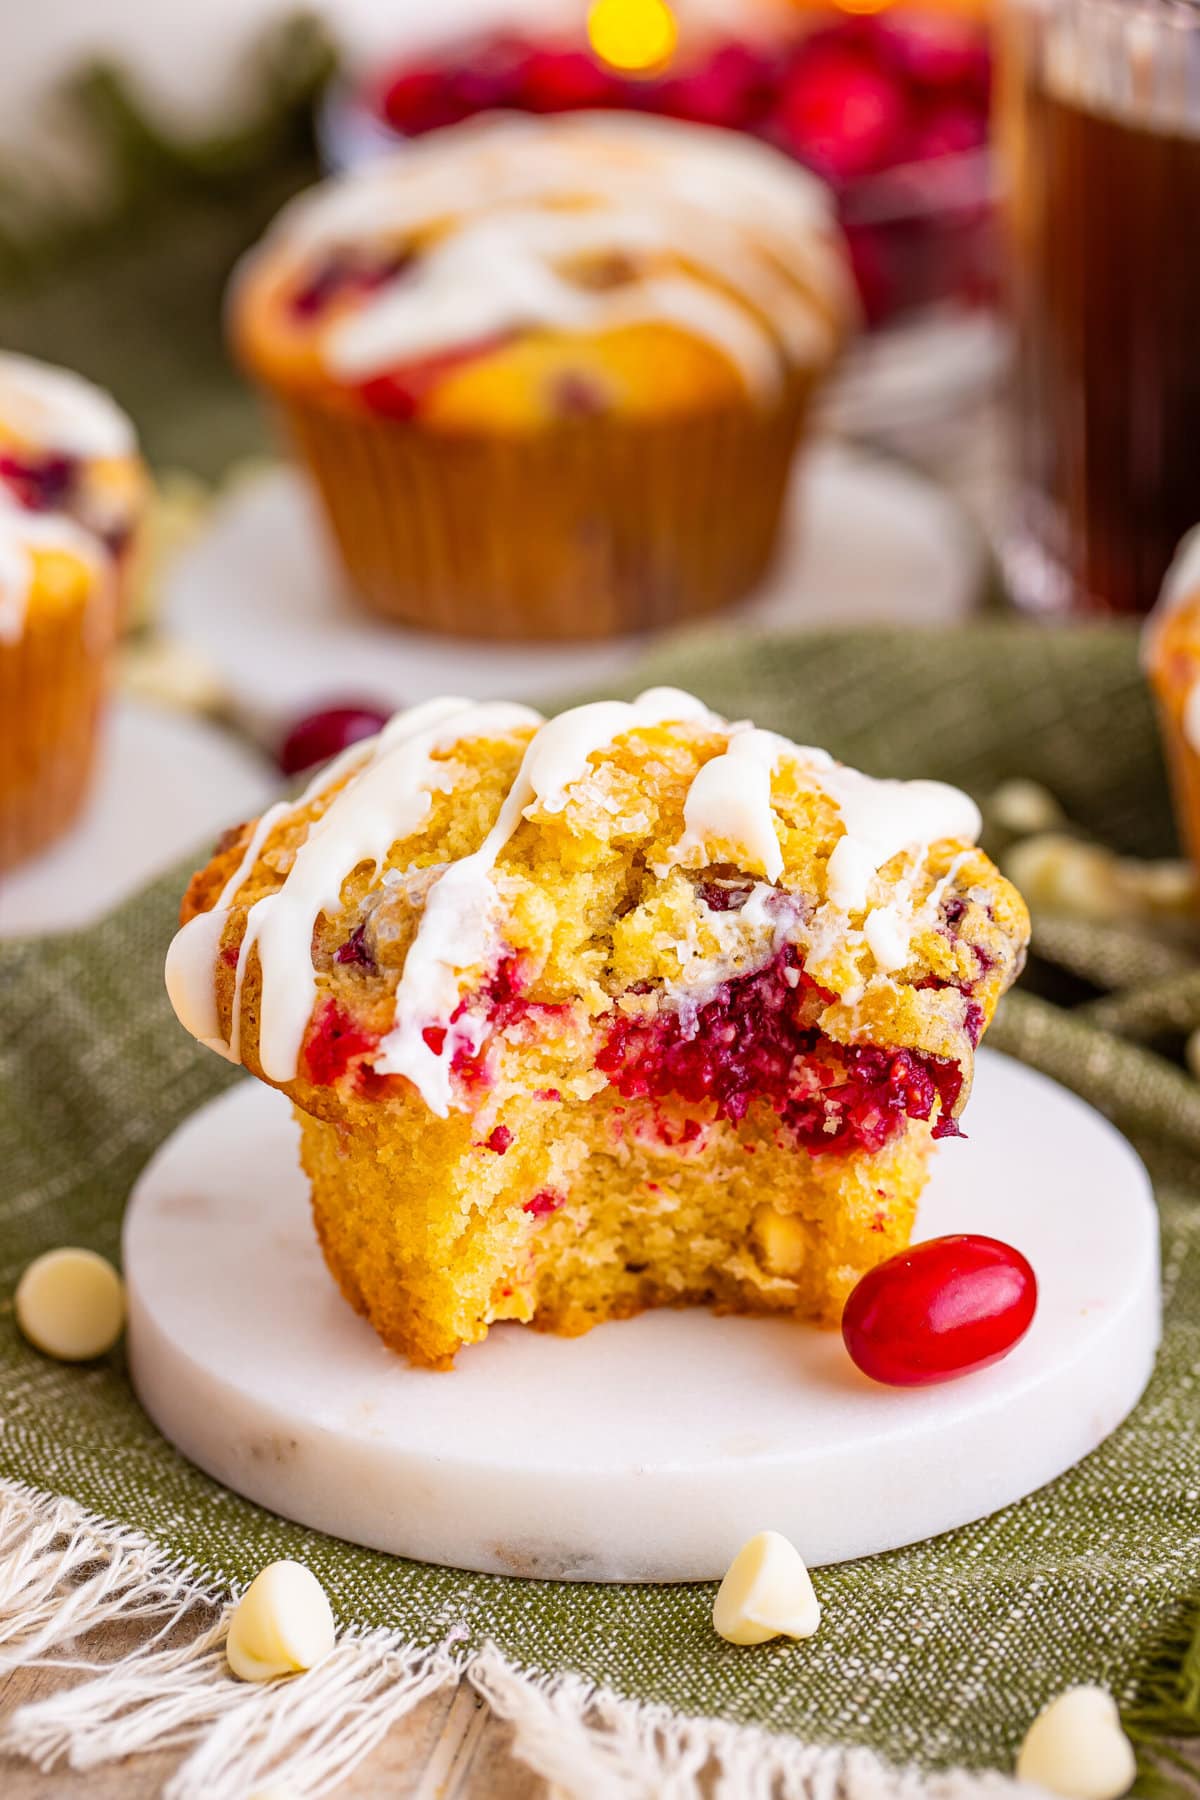 Cranberry Muffin with a bite taken out